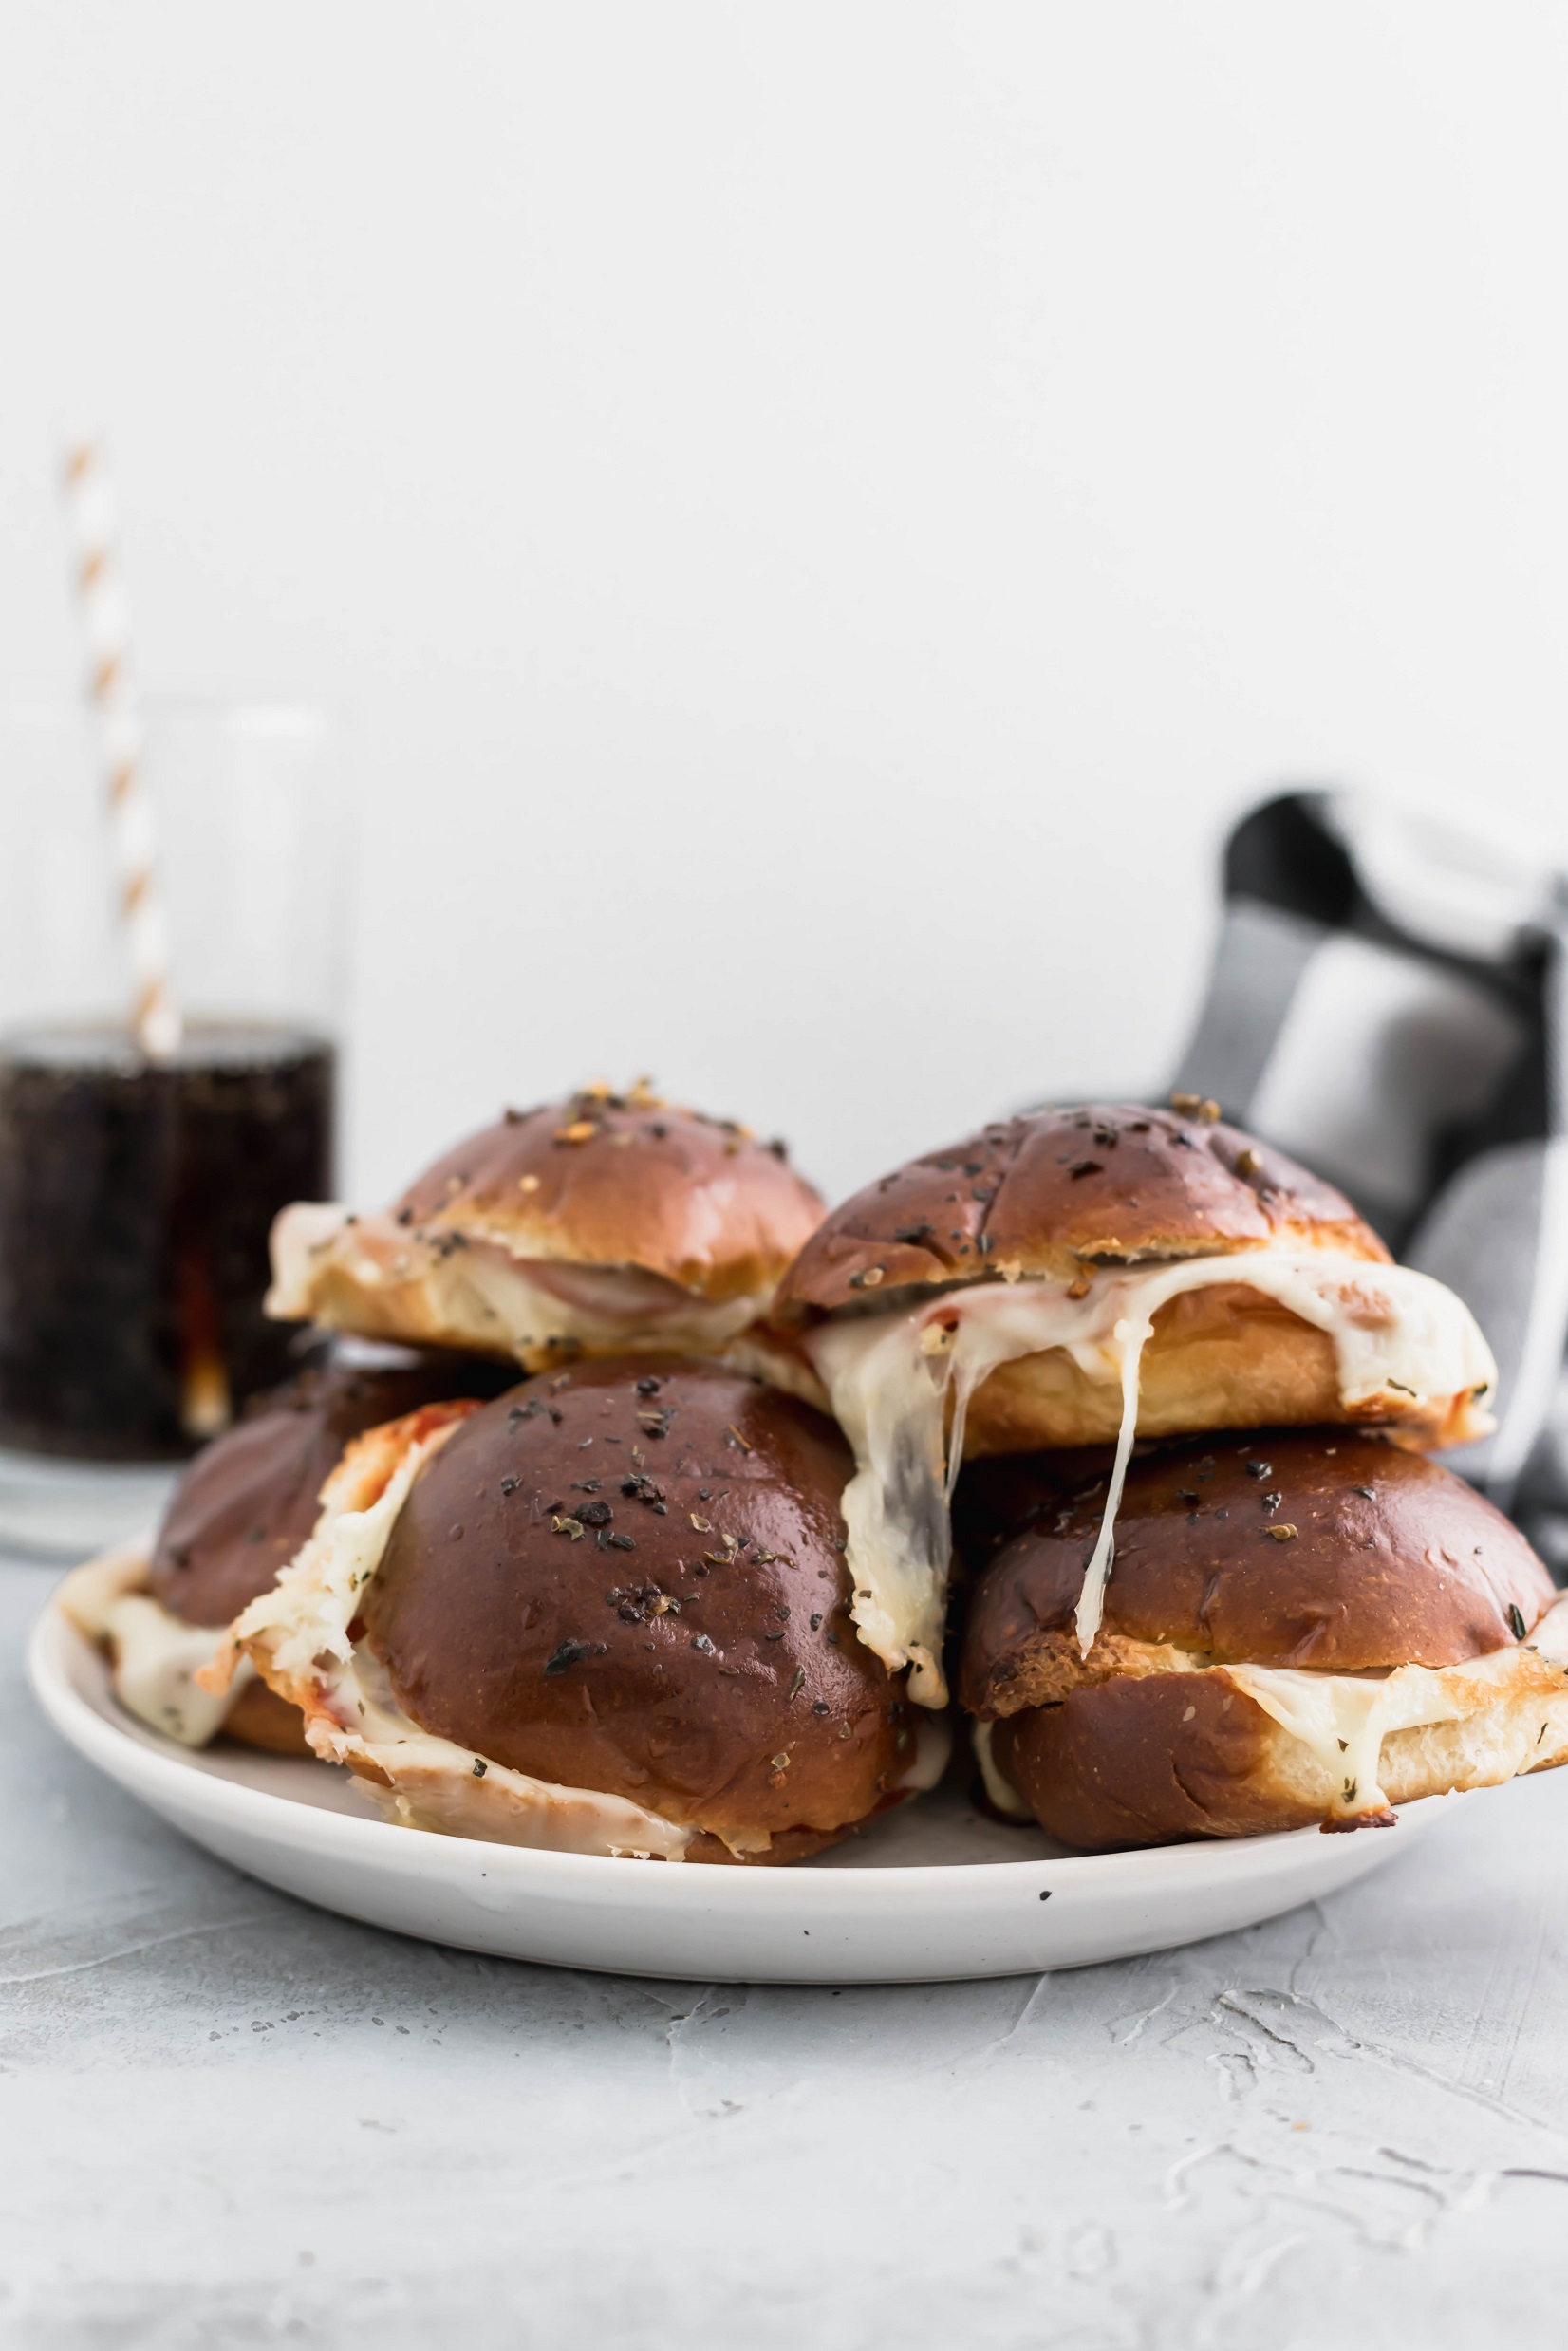 Need a simple dinner idea? These Easy Pepperoni Pizza Sliders are the perfect 30 minute meal or appetizer that the whole family will enjoy.